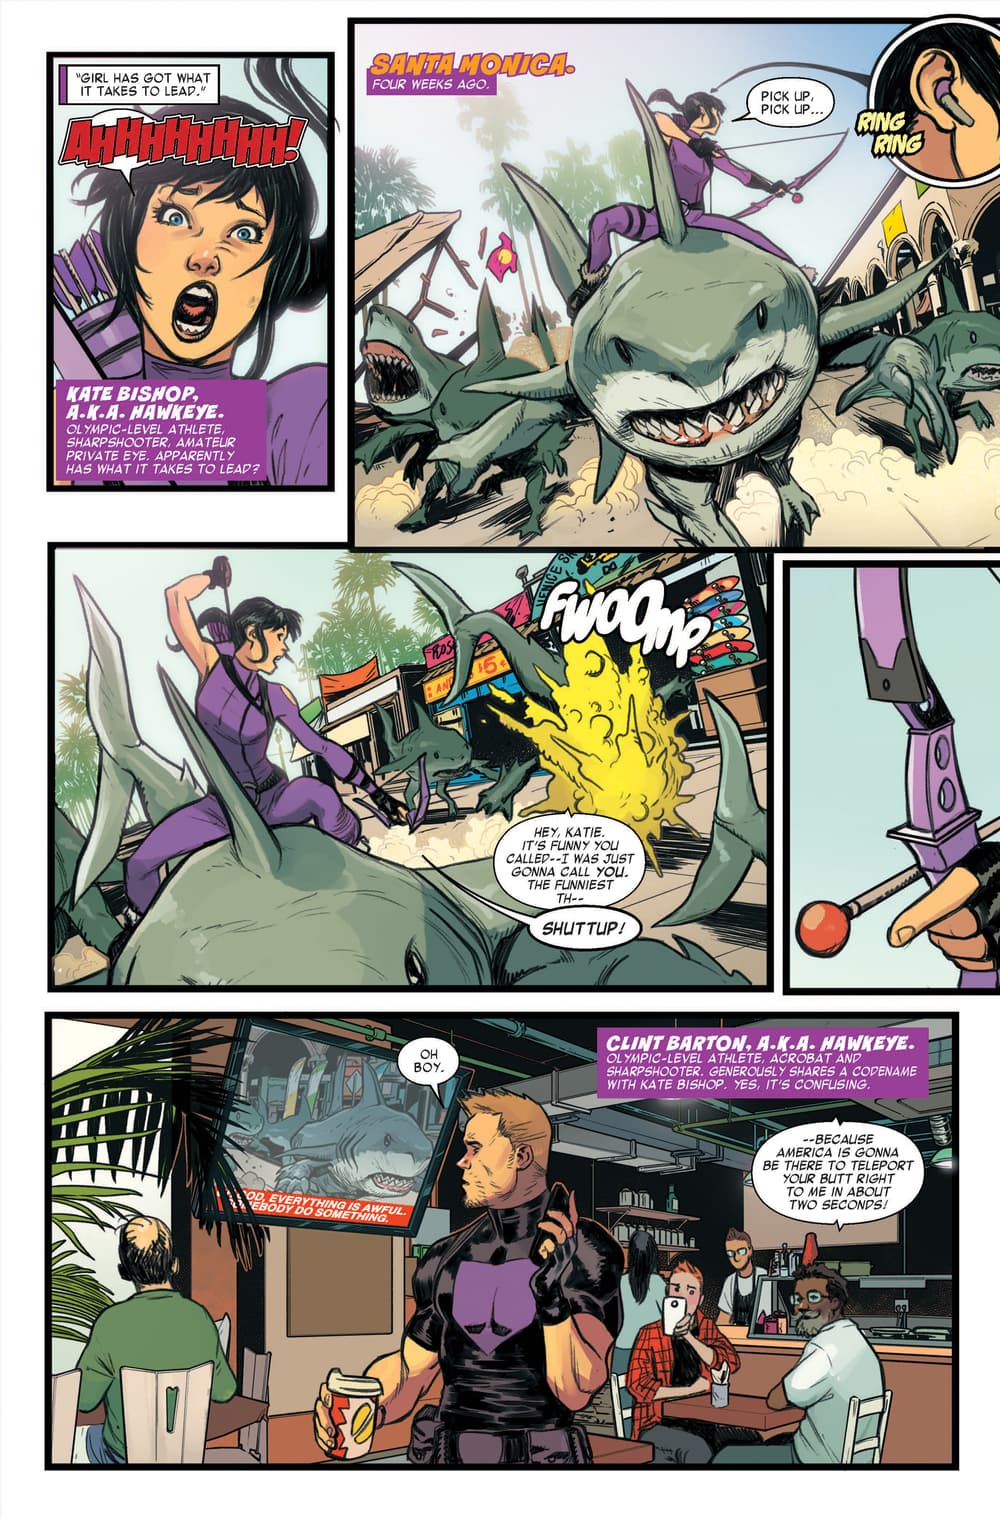 West Coast Avengers 1 preview page